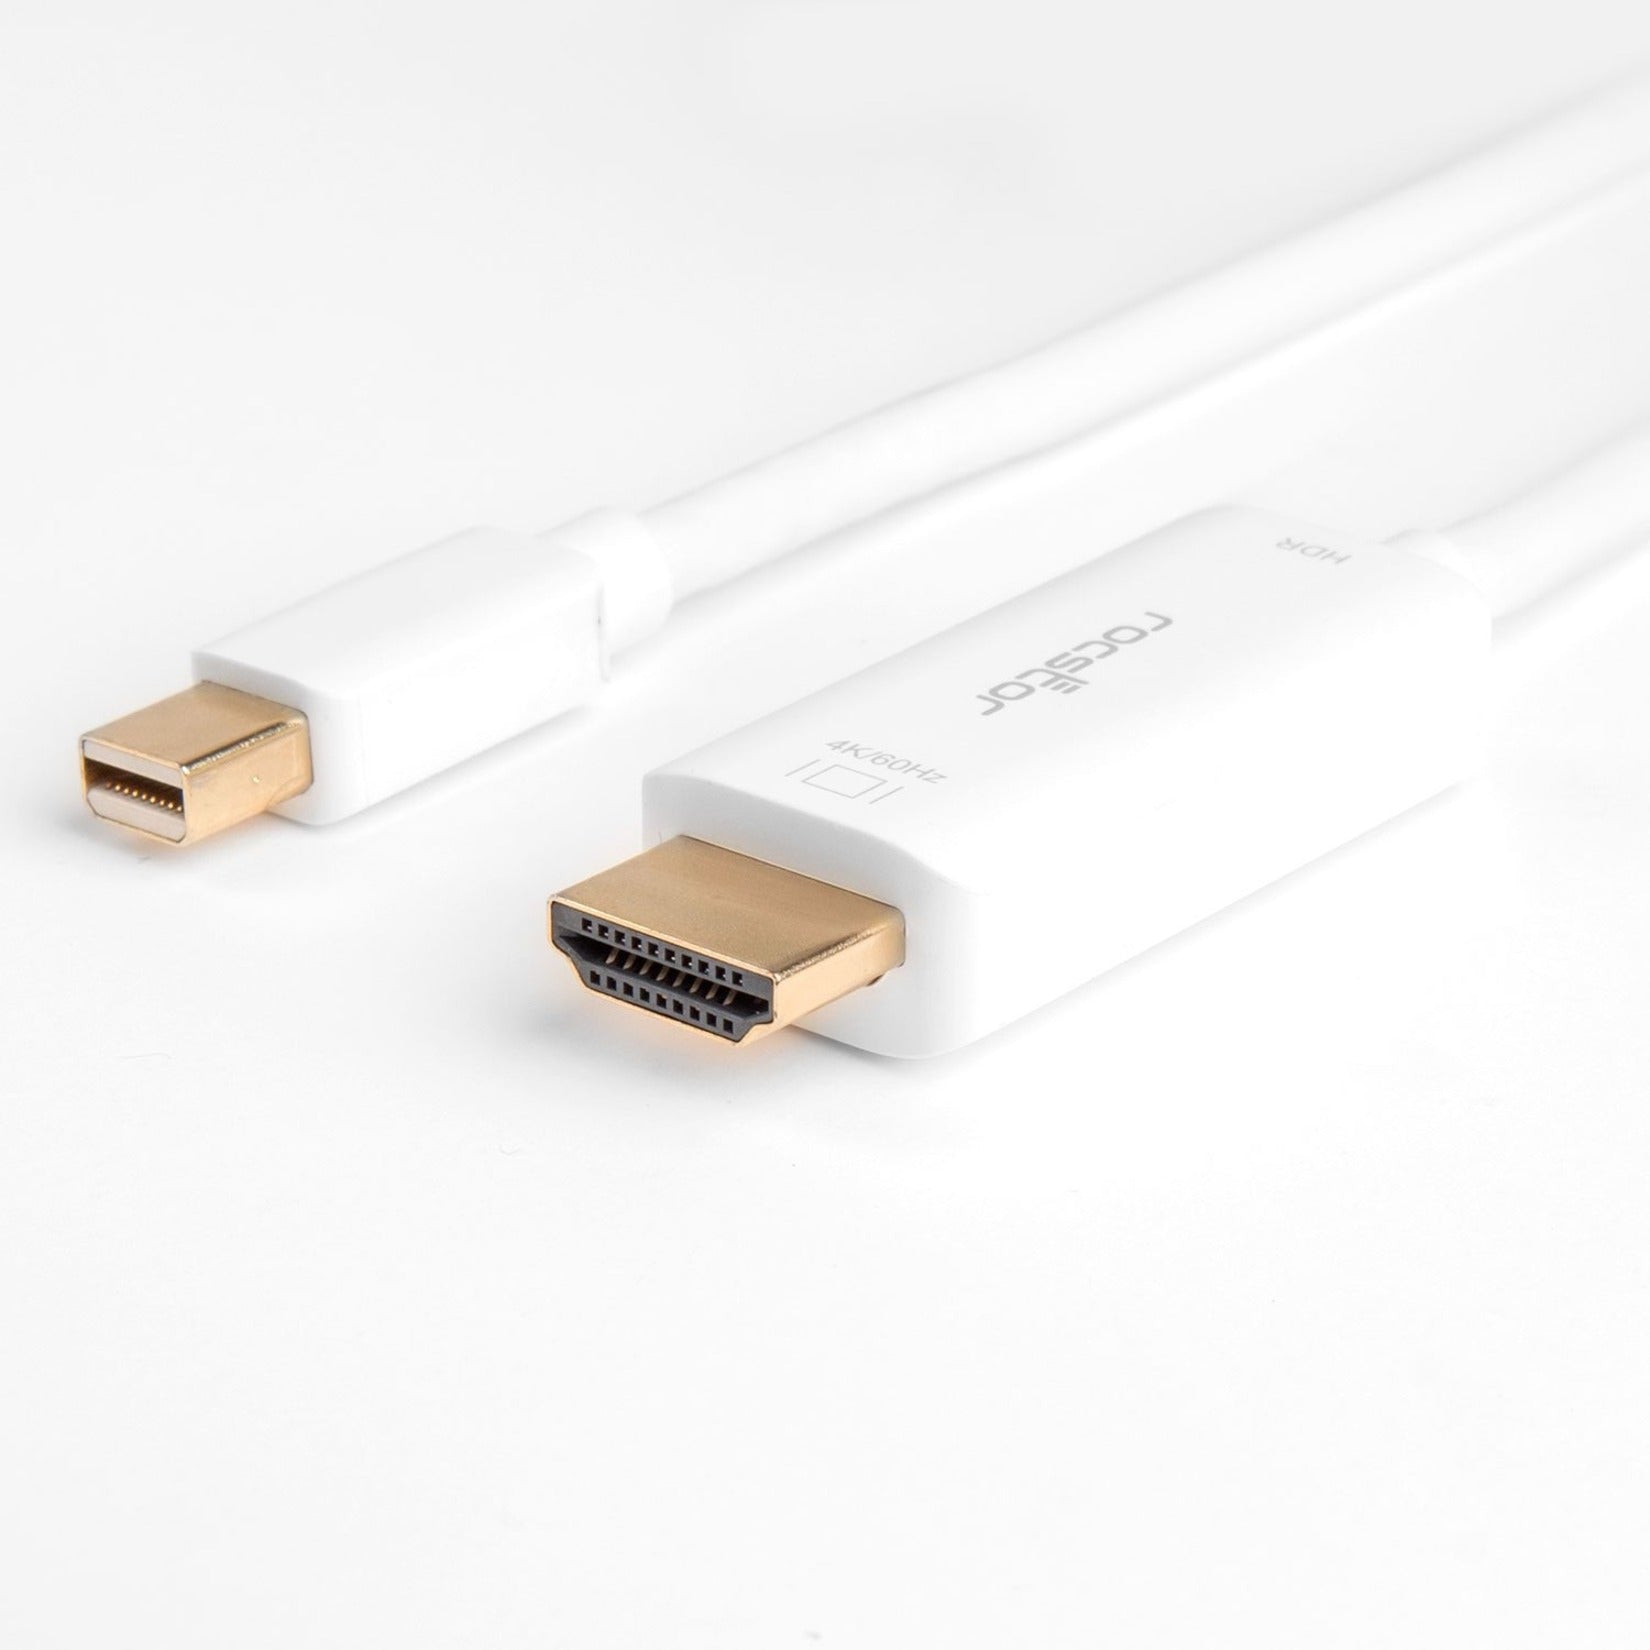 Rocstor Y10C196-W2 Premium Mini DisplayPort to HDMI Cable M/M - 60Hz, 6 ft, Gold-Plated Connectors, 4K Supported